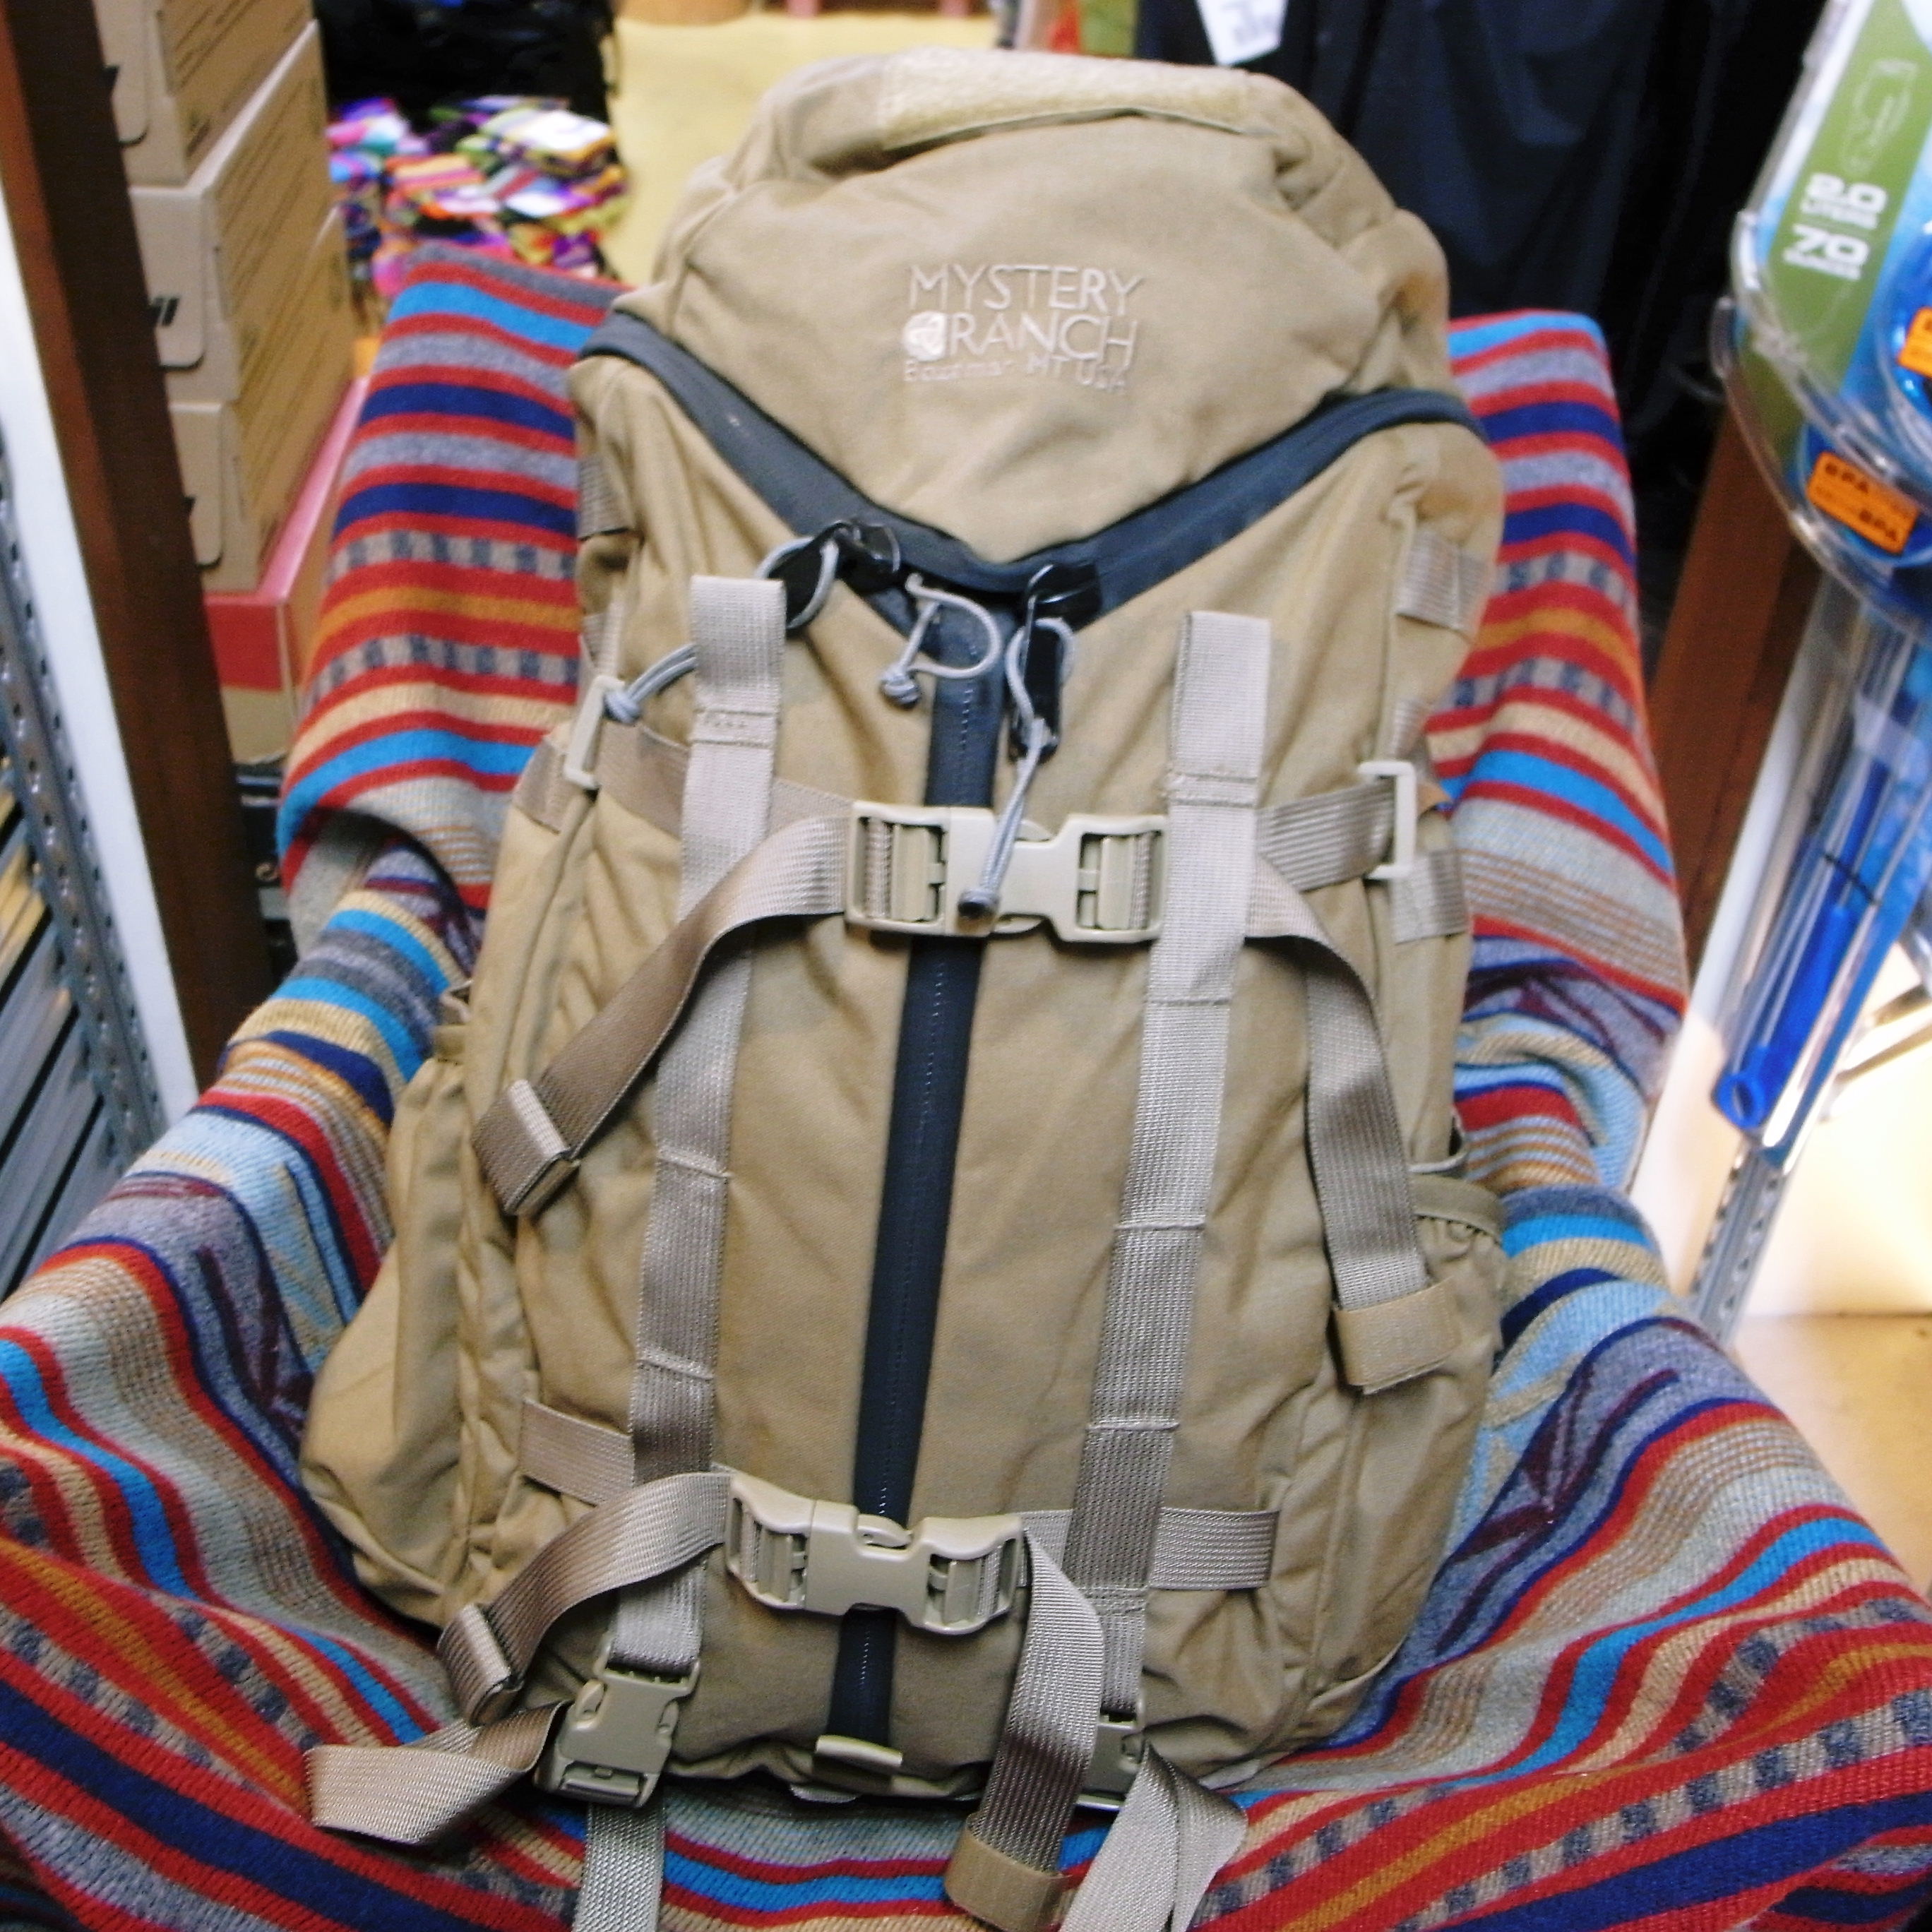 Mystery Ranch 3 Day Assault Pack ミステリーランチ 3デイアサルト